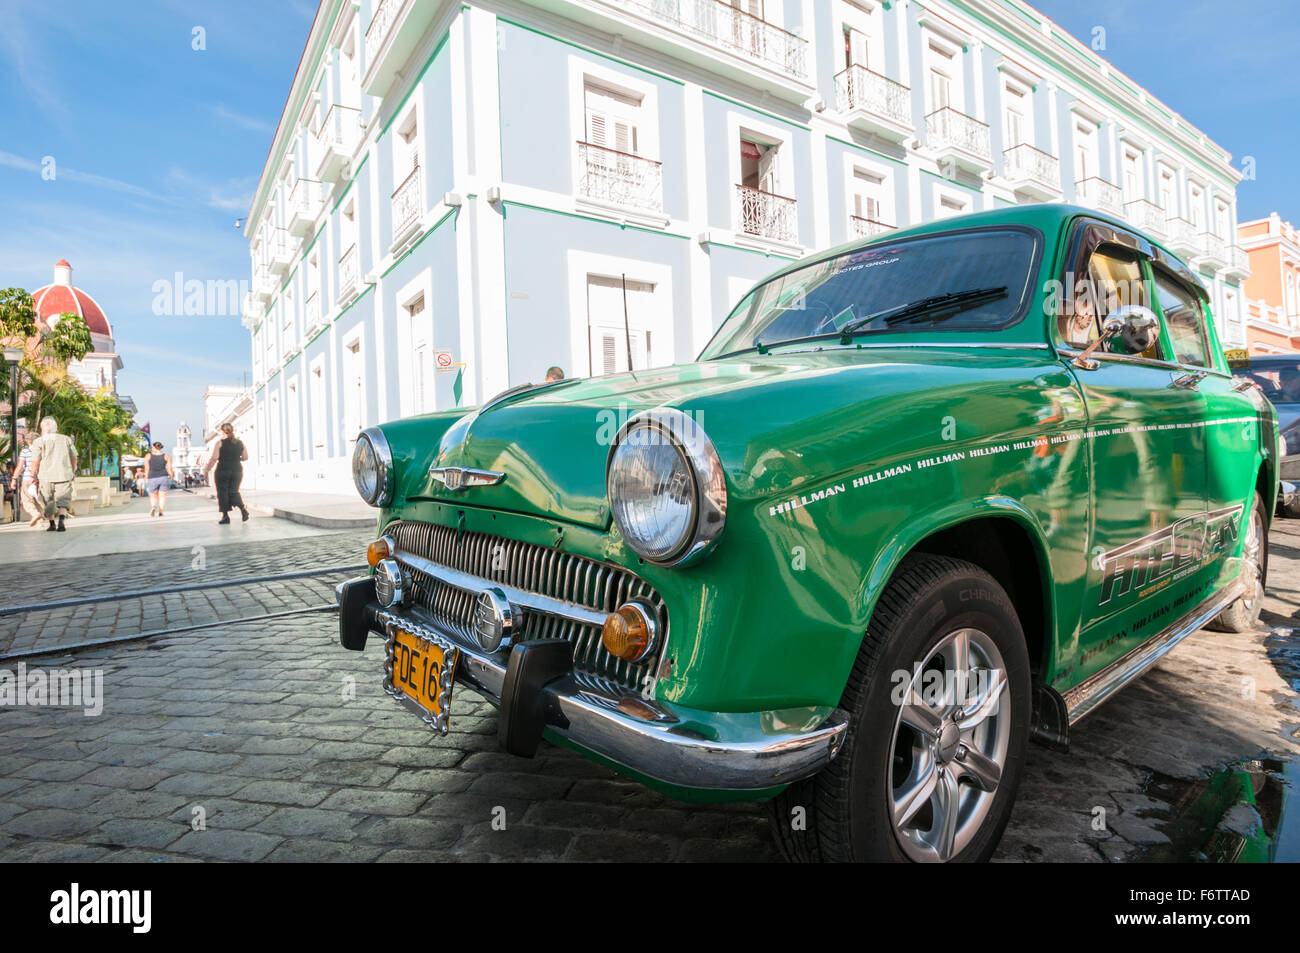 Cien Fuegos vintage car with building in background DEZEMBER 26, Stock Photo